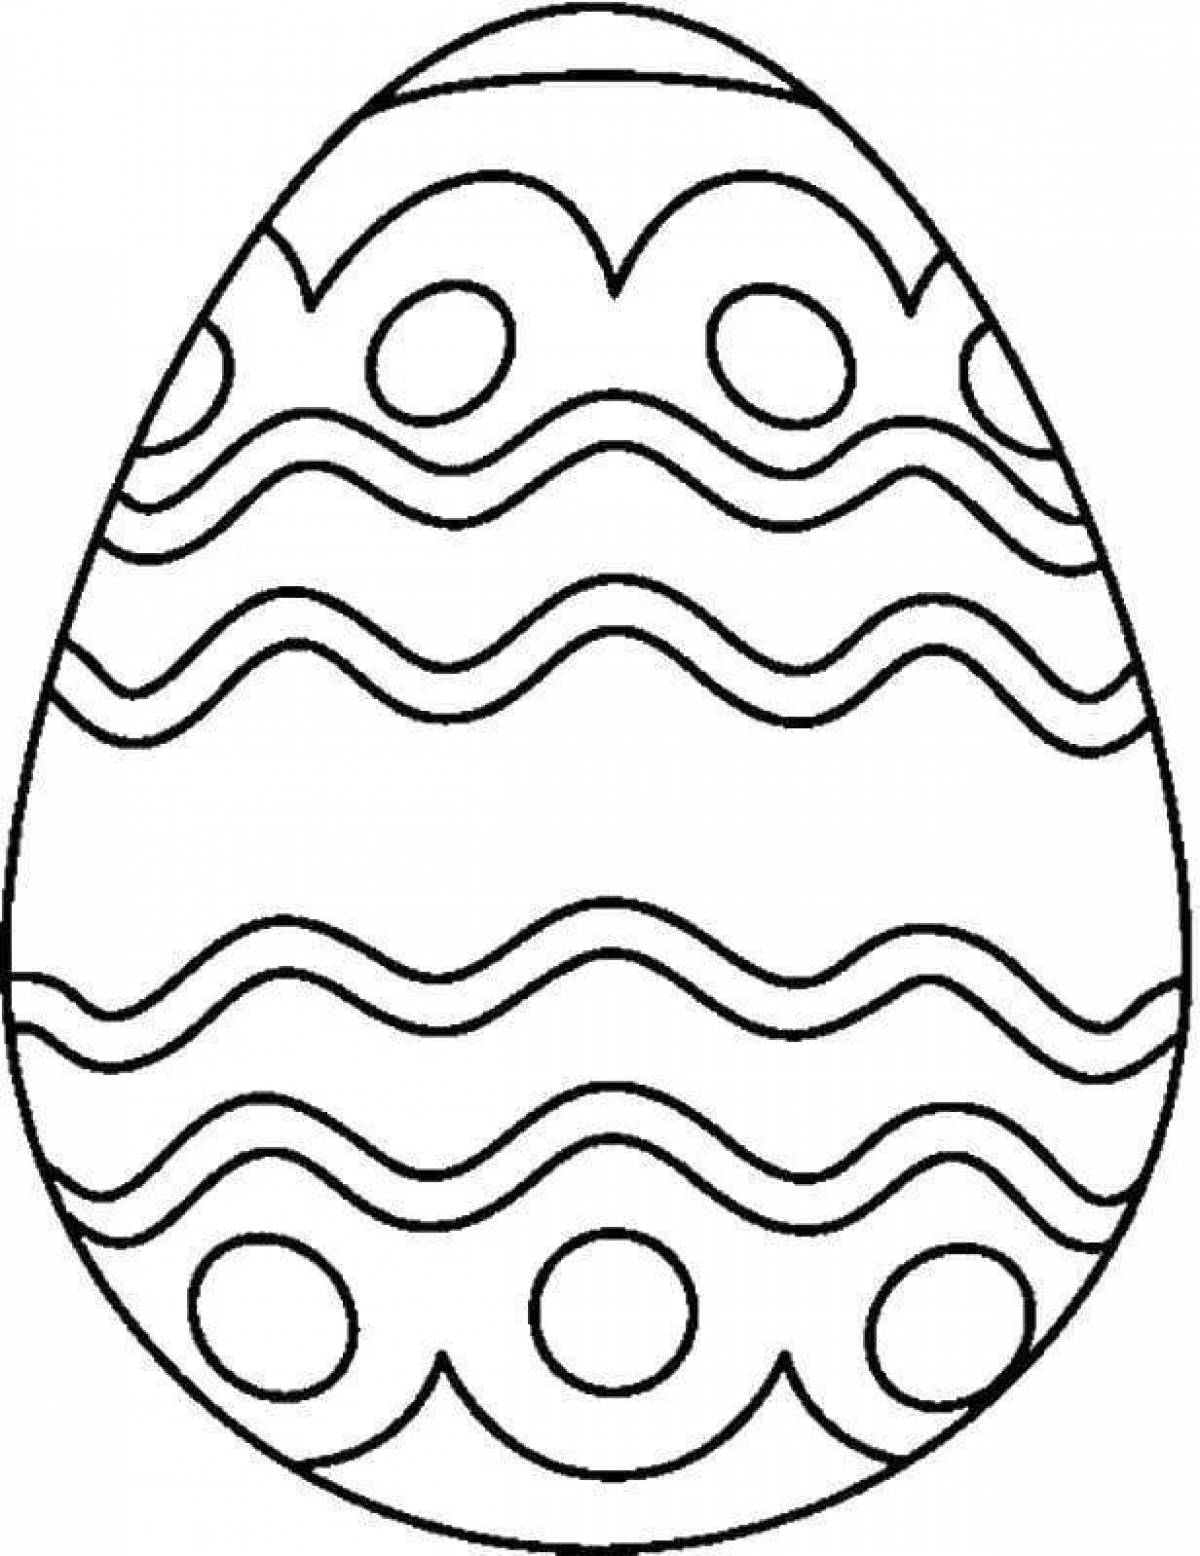 Joyful testicles coloring page